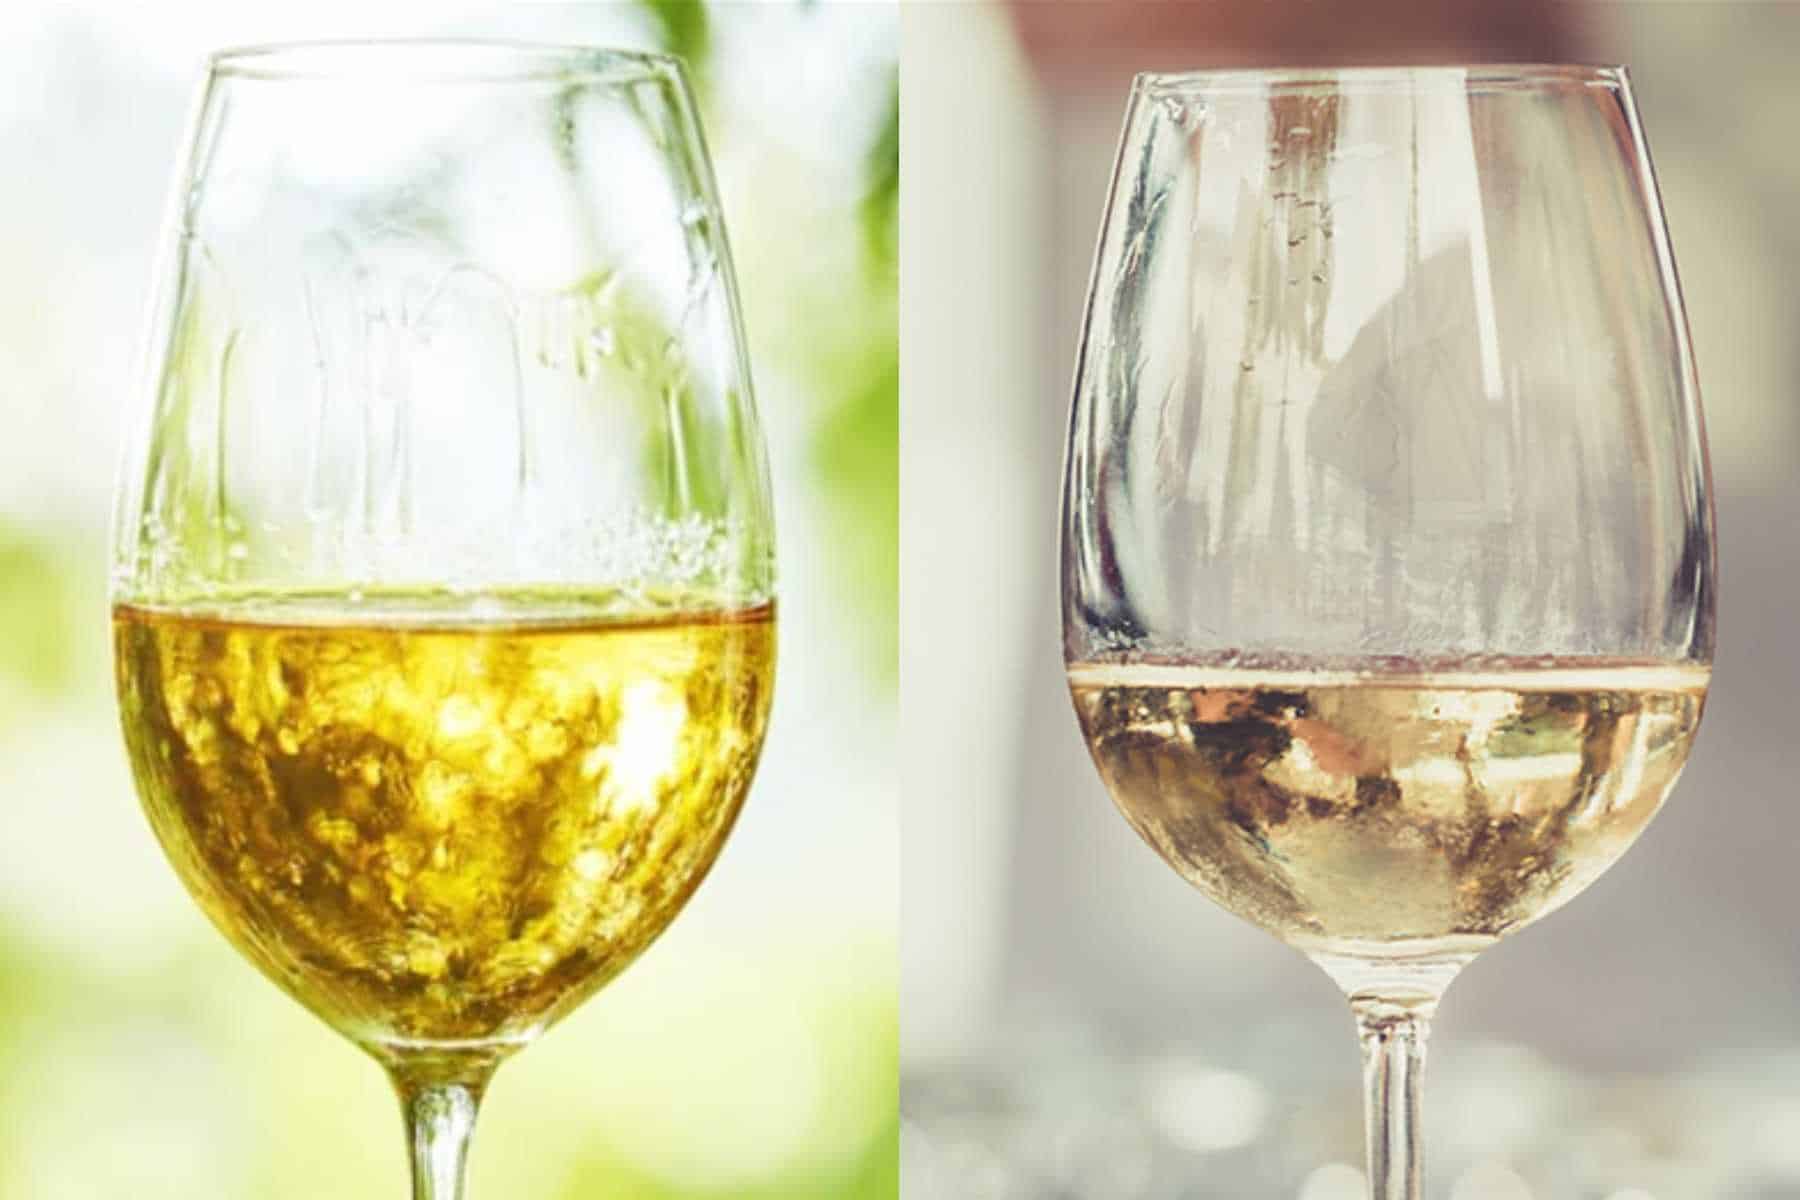 How are Pinot Gris and Pinot Grigio different from each other